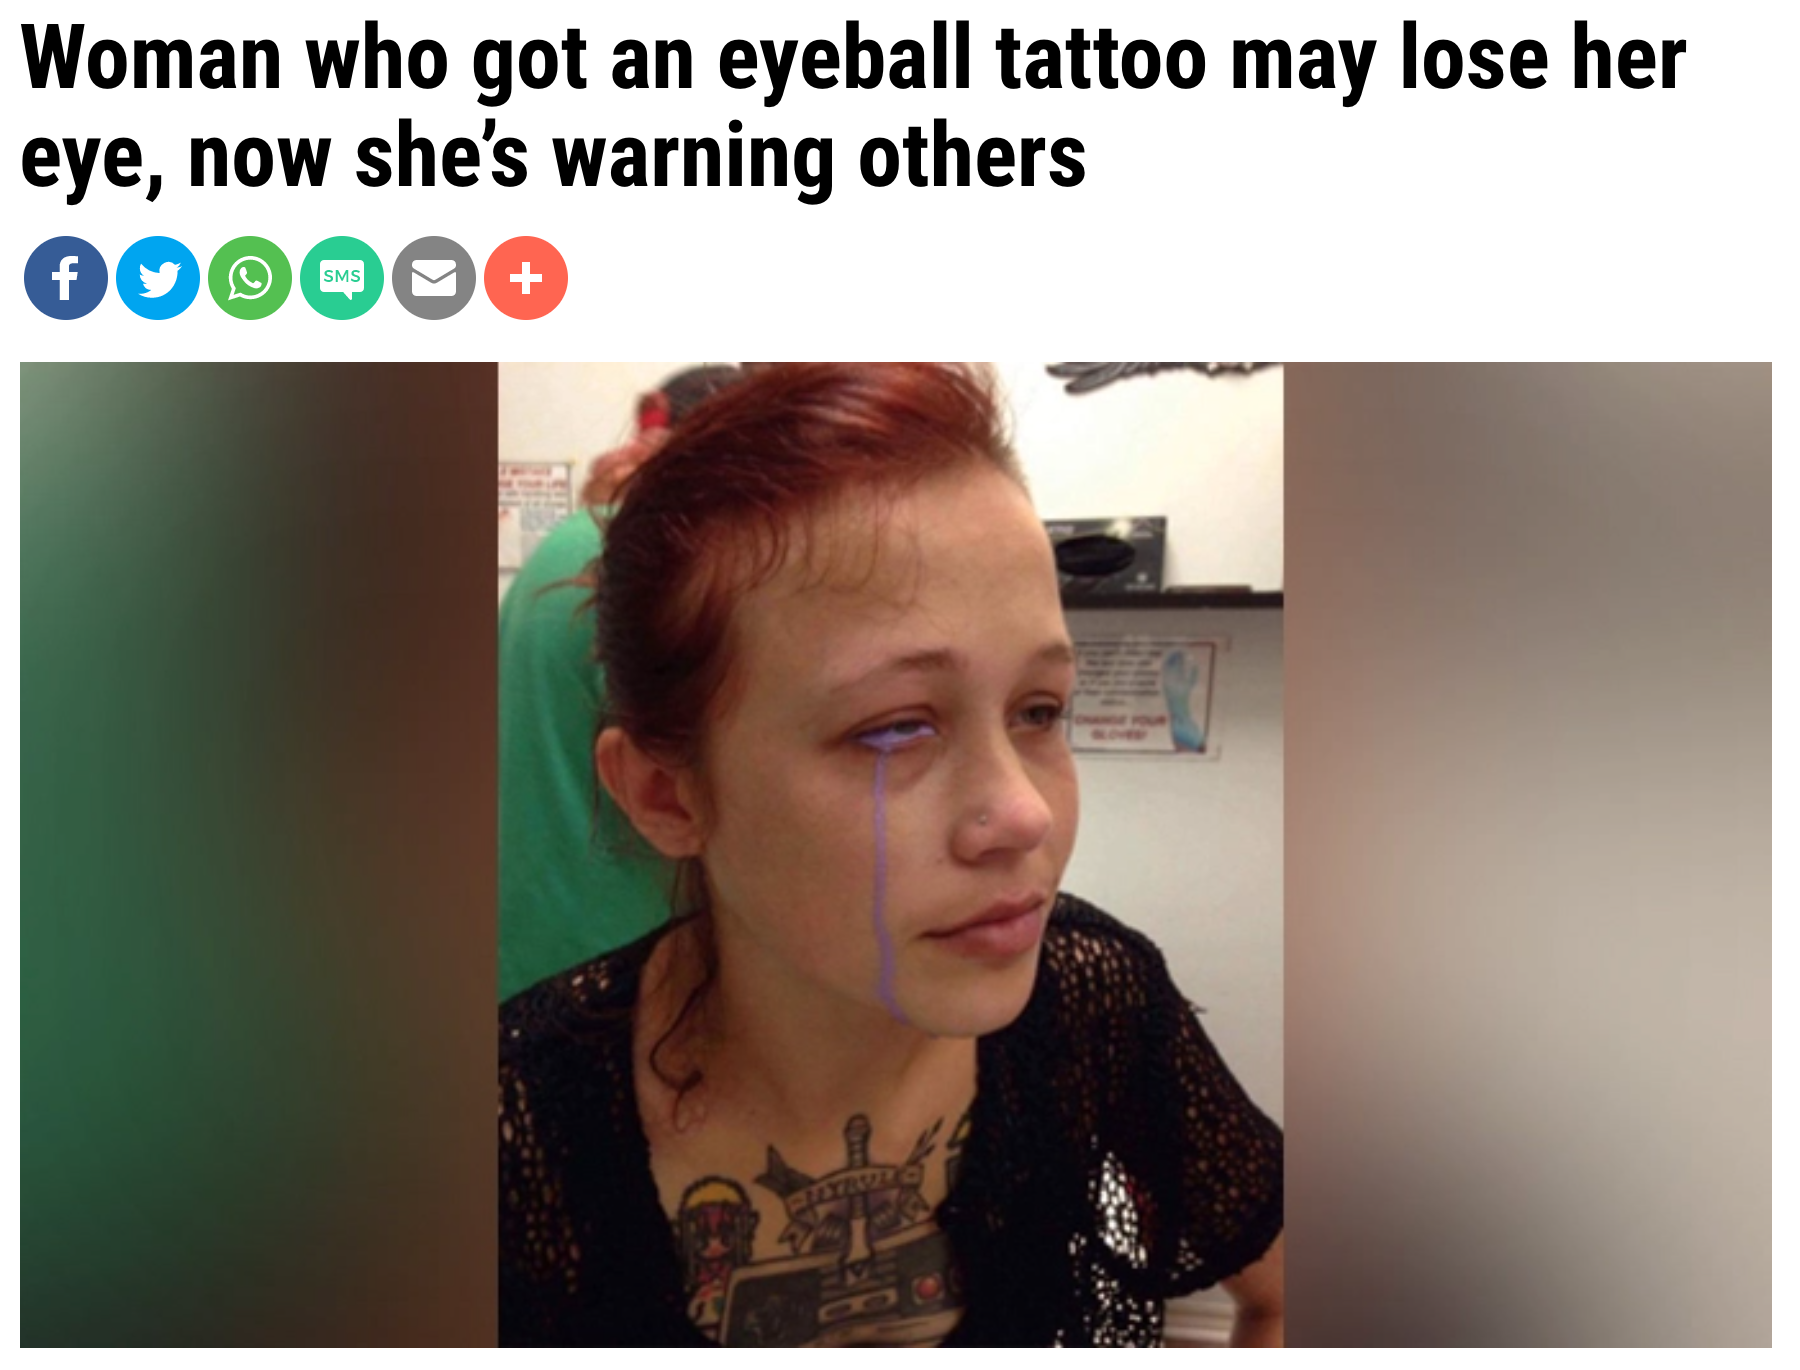 Woman who got an eyeball tattoo may lose her eye, now she's warning others